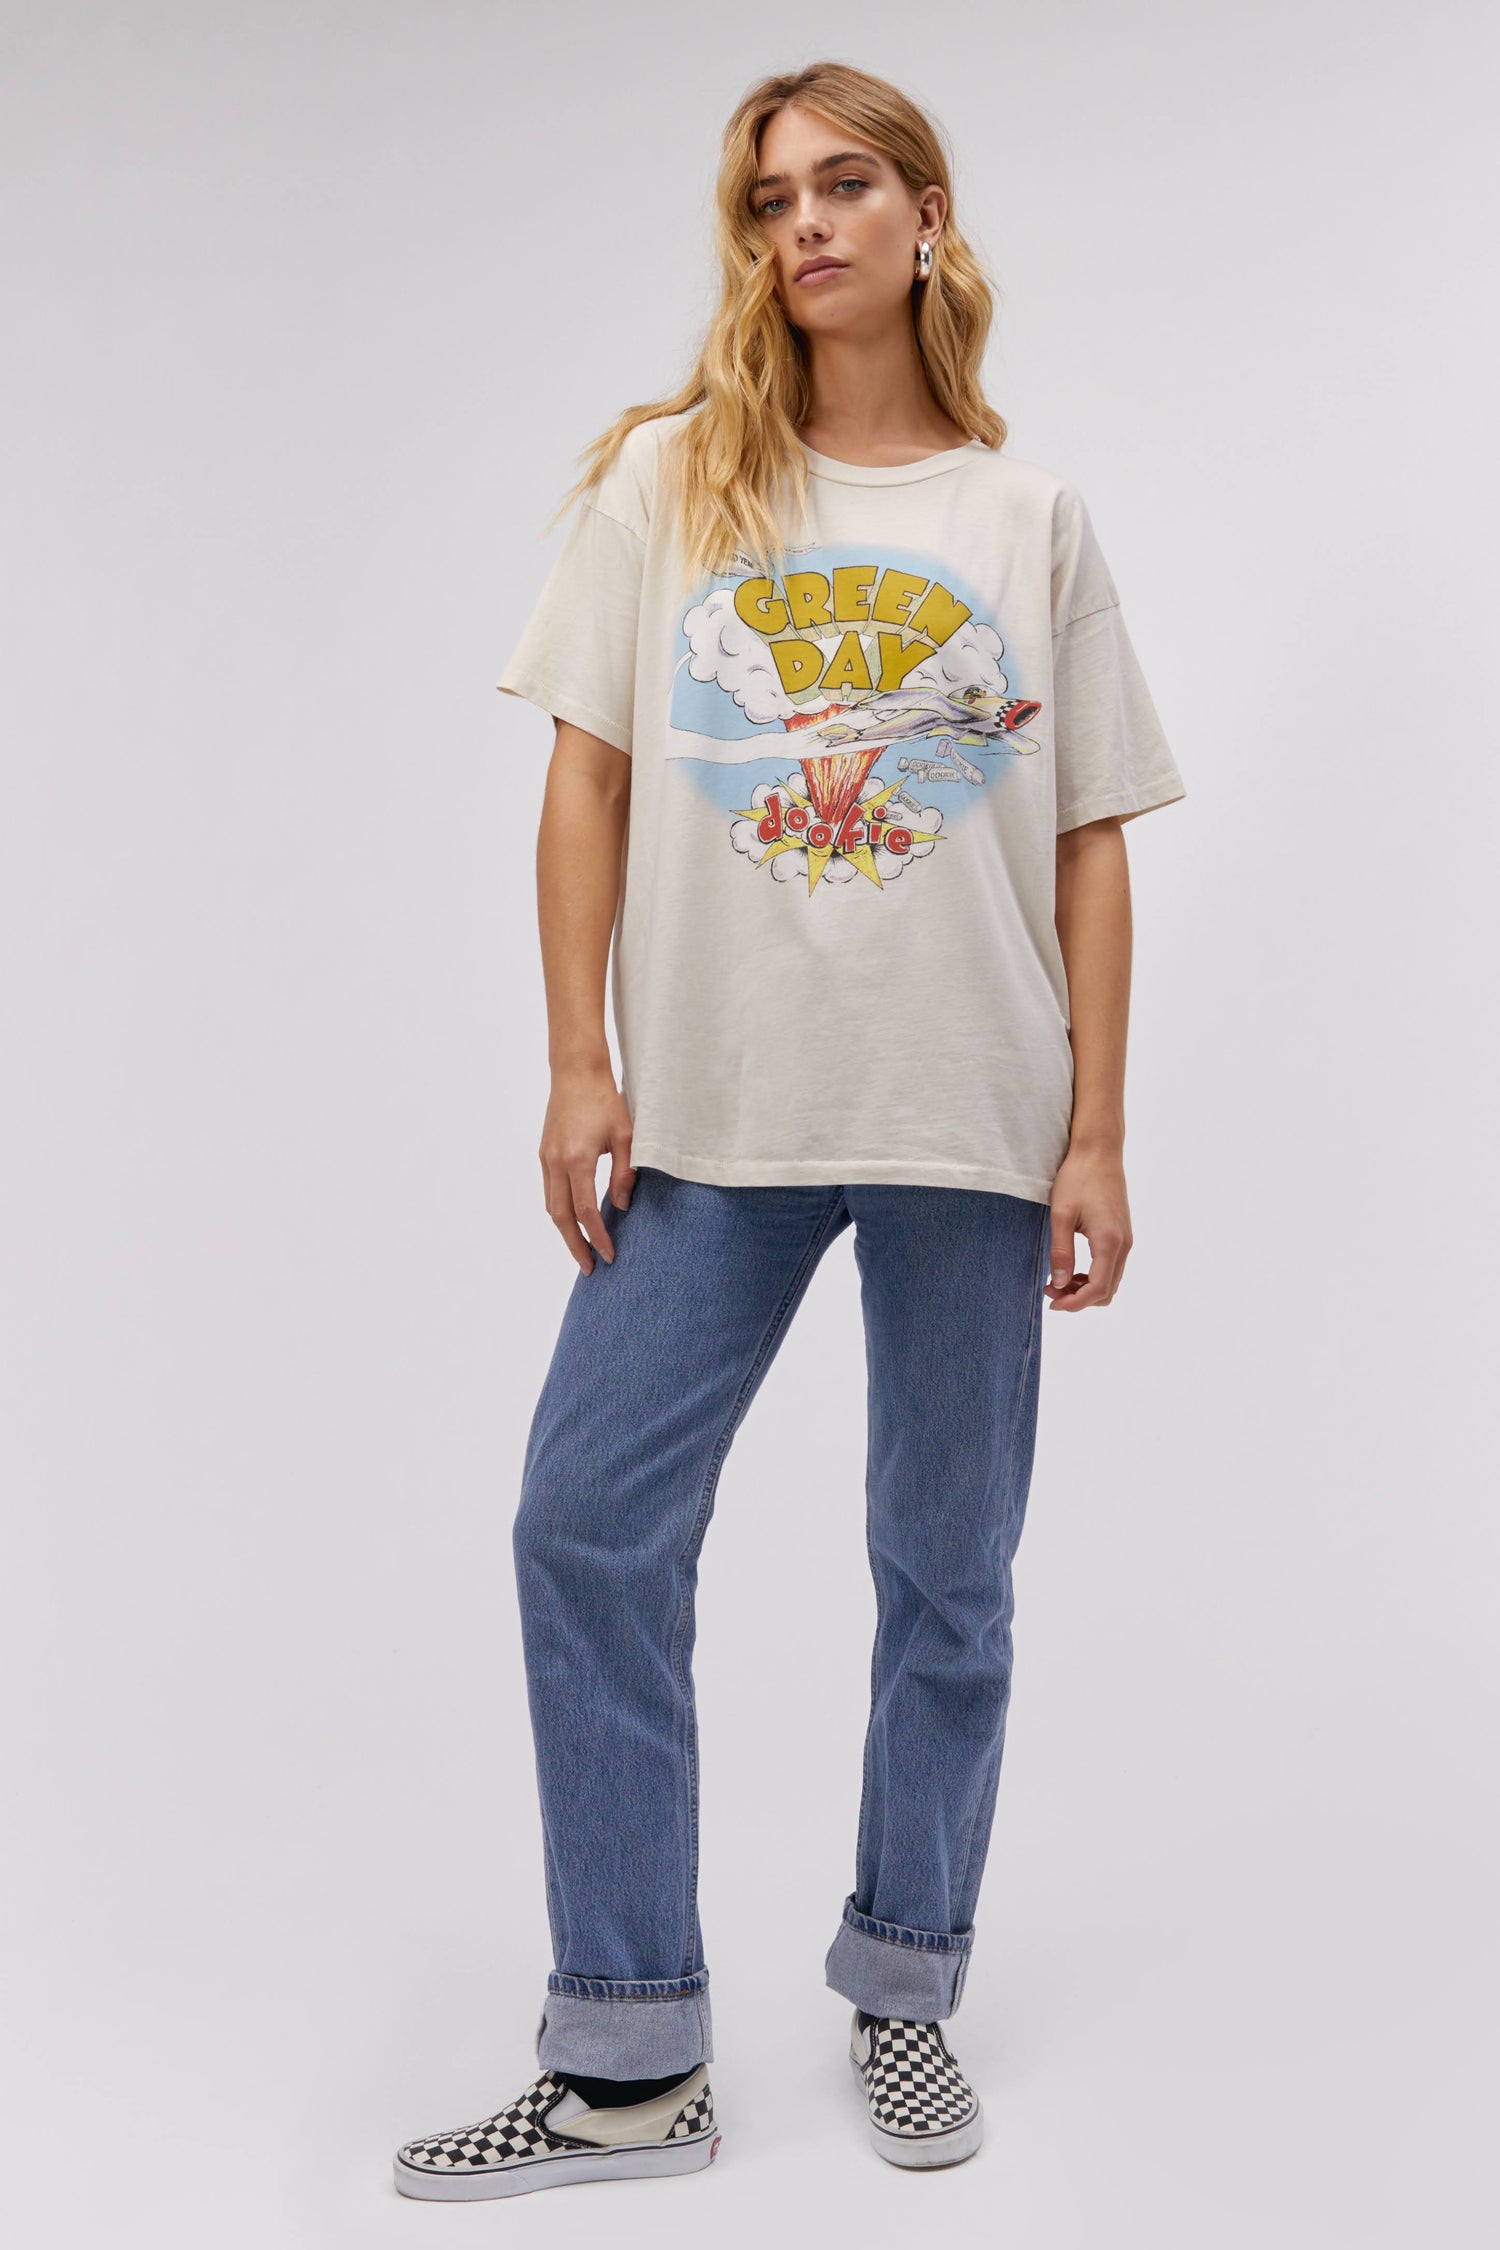 A blonde-haired model featuring a white tee designed with the Green Day's album Dookie cover.